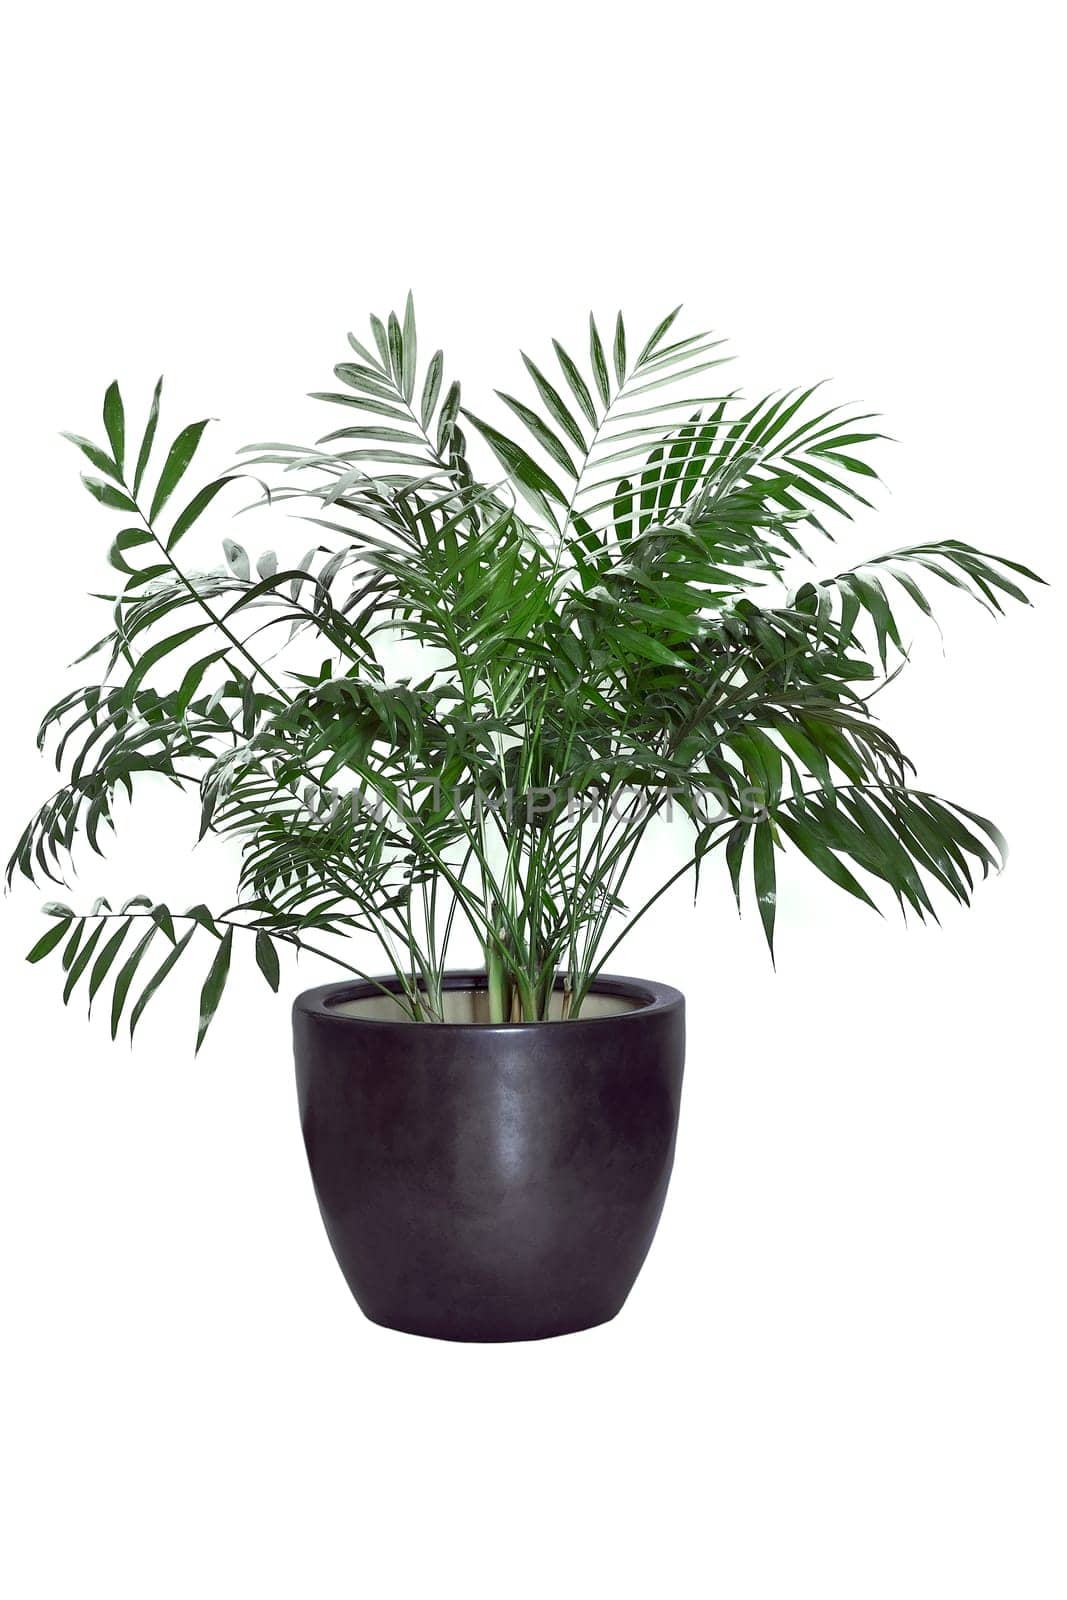 Kentia Palm Tree grey in pot. Houseplant isolated on white background by Annavish